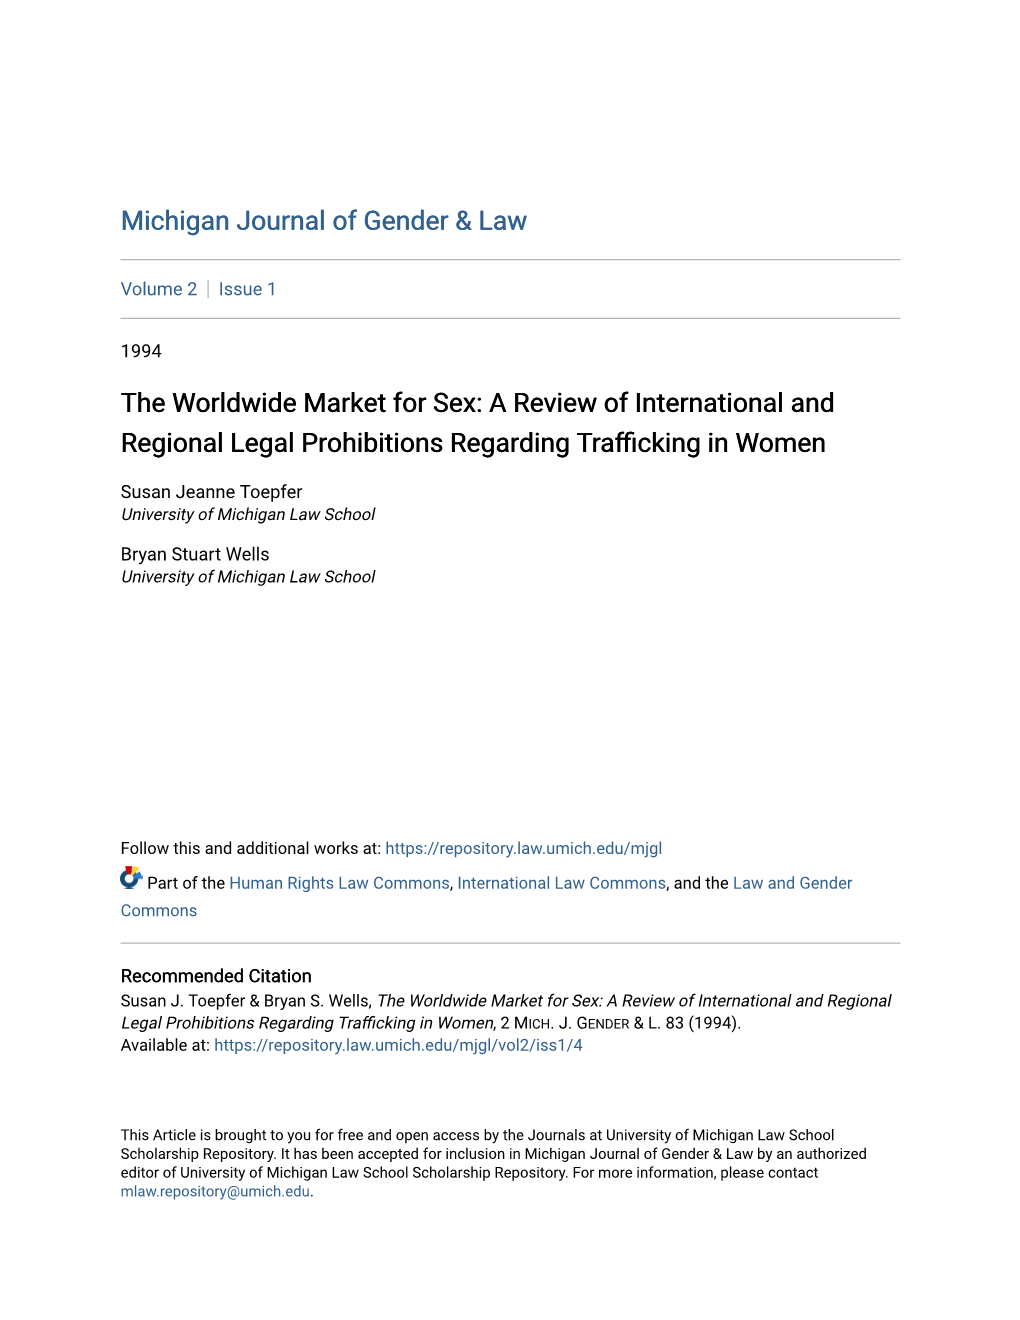 The Worldwide Market for Sex: a Review of International and Regional Legal Prohibitions Regarding Trafficking Inomen W